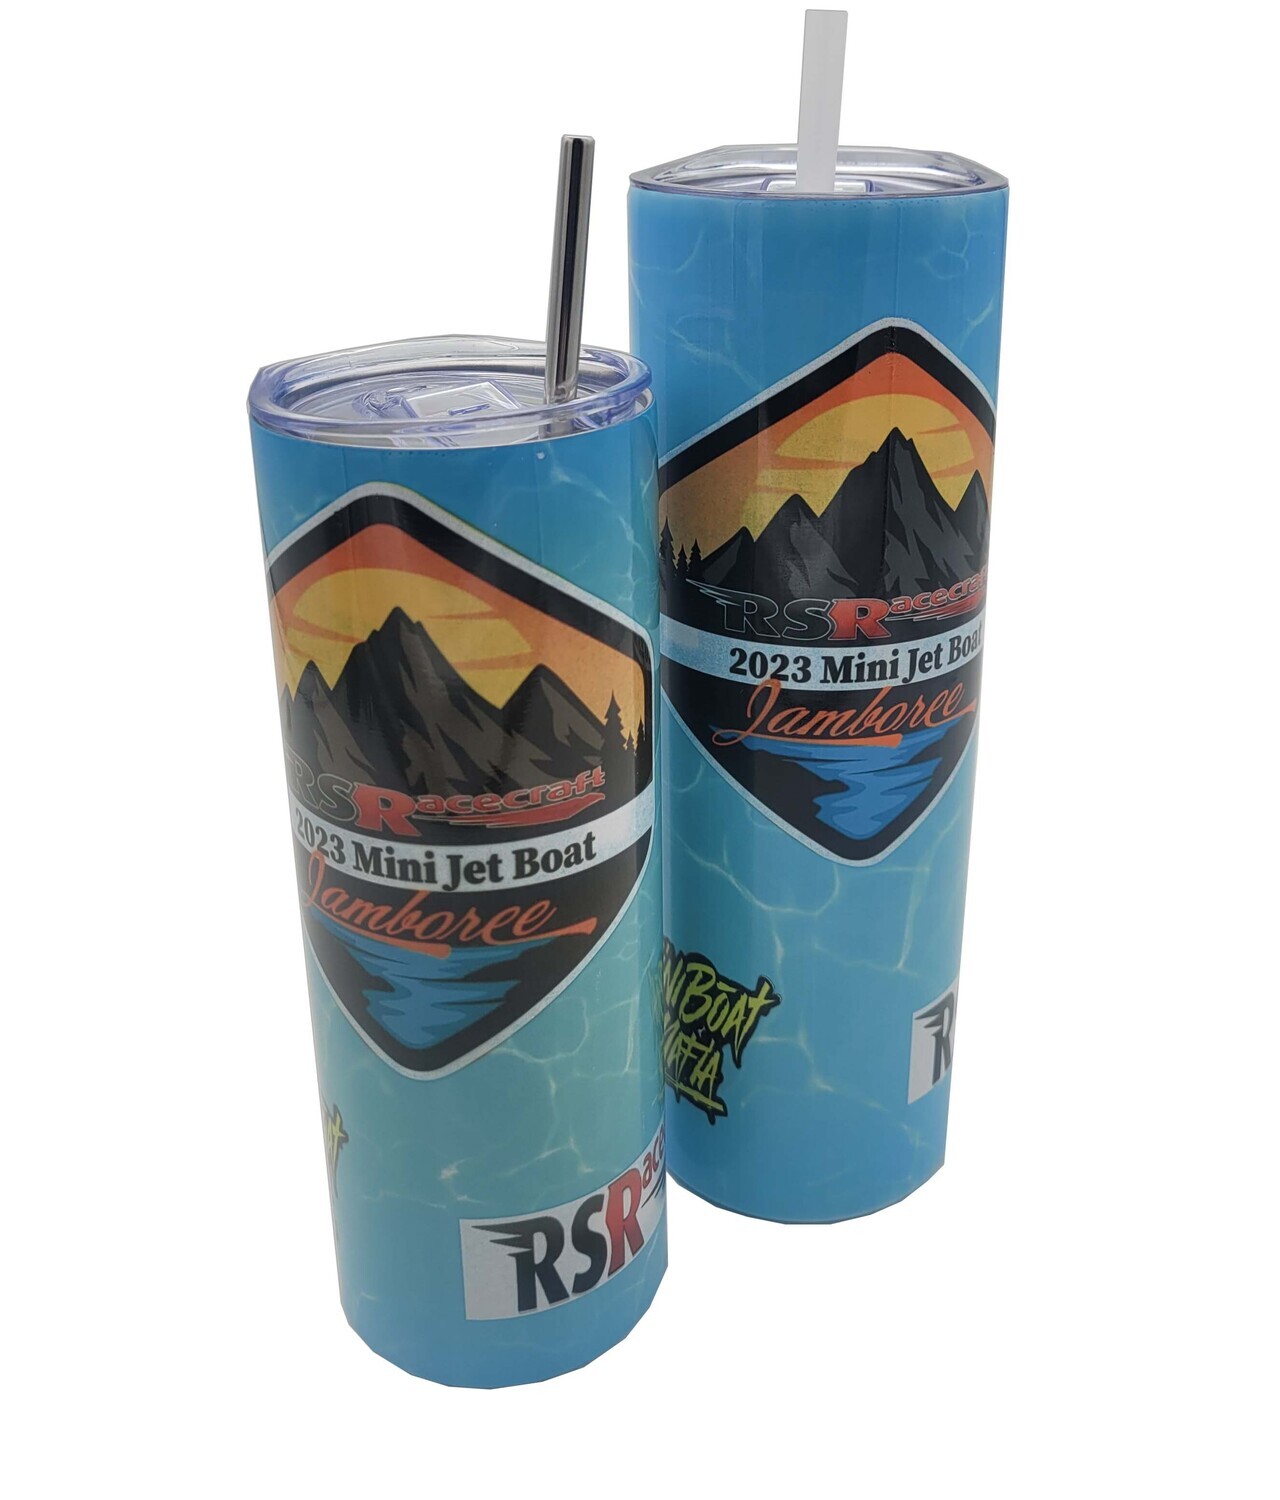 RSR JAMOREE 23 EVENT STAINLESS TUMBLER CUP 20 OZ